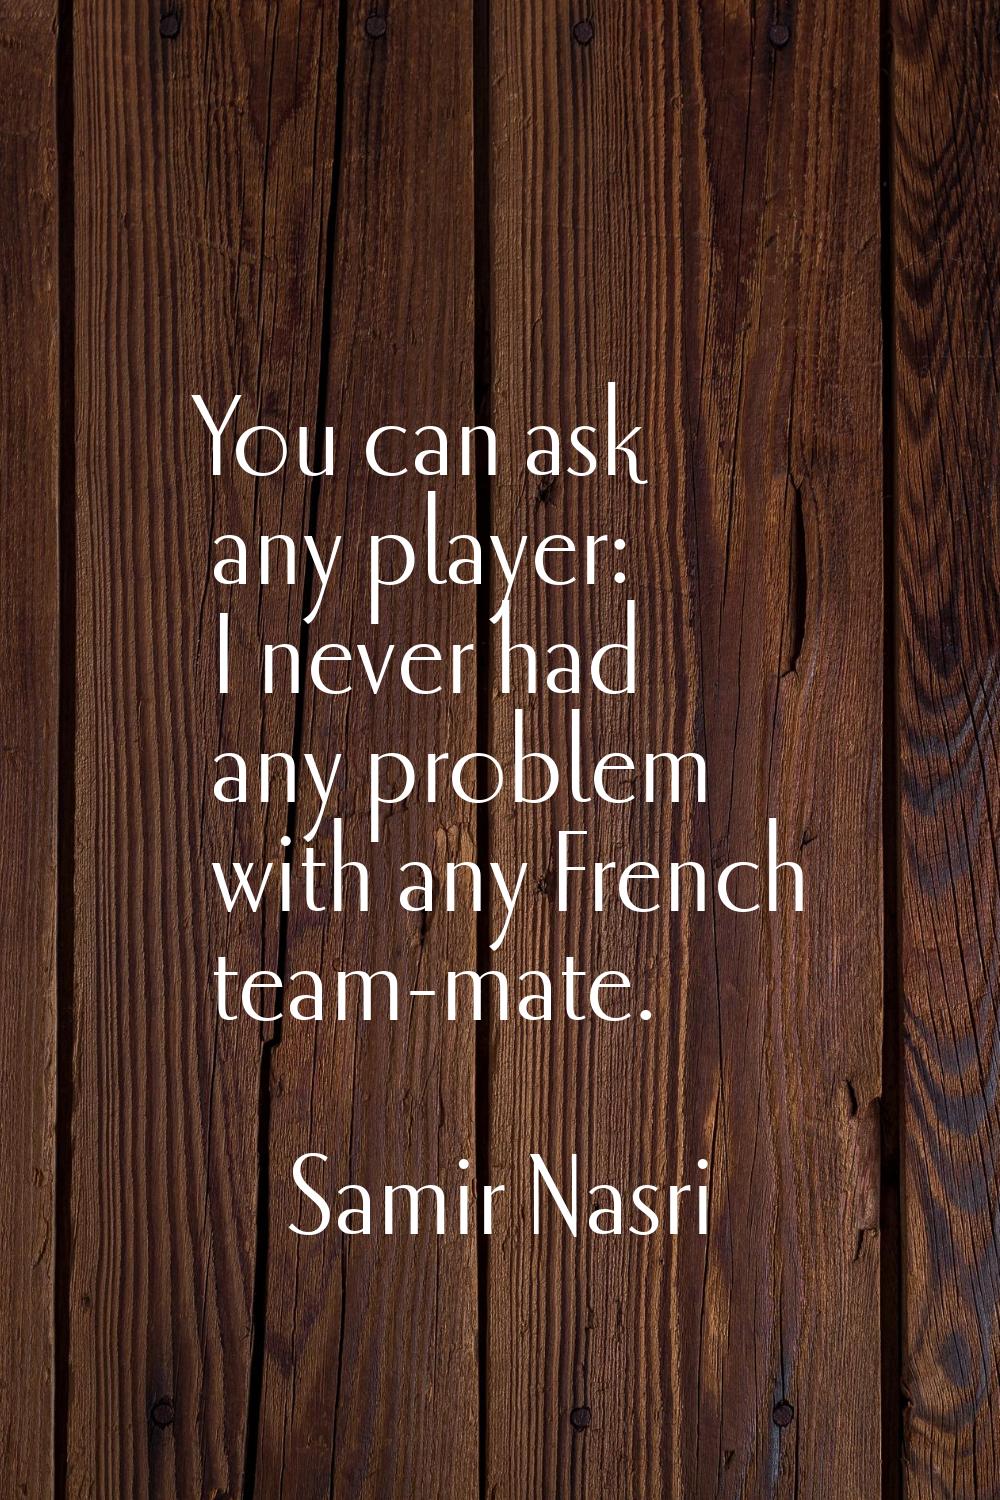 You can ask any player: I never had any problem with any French team-mate.